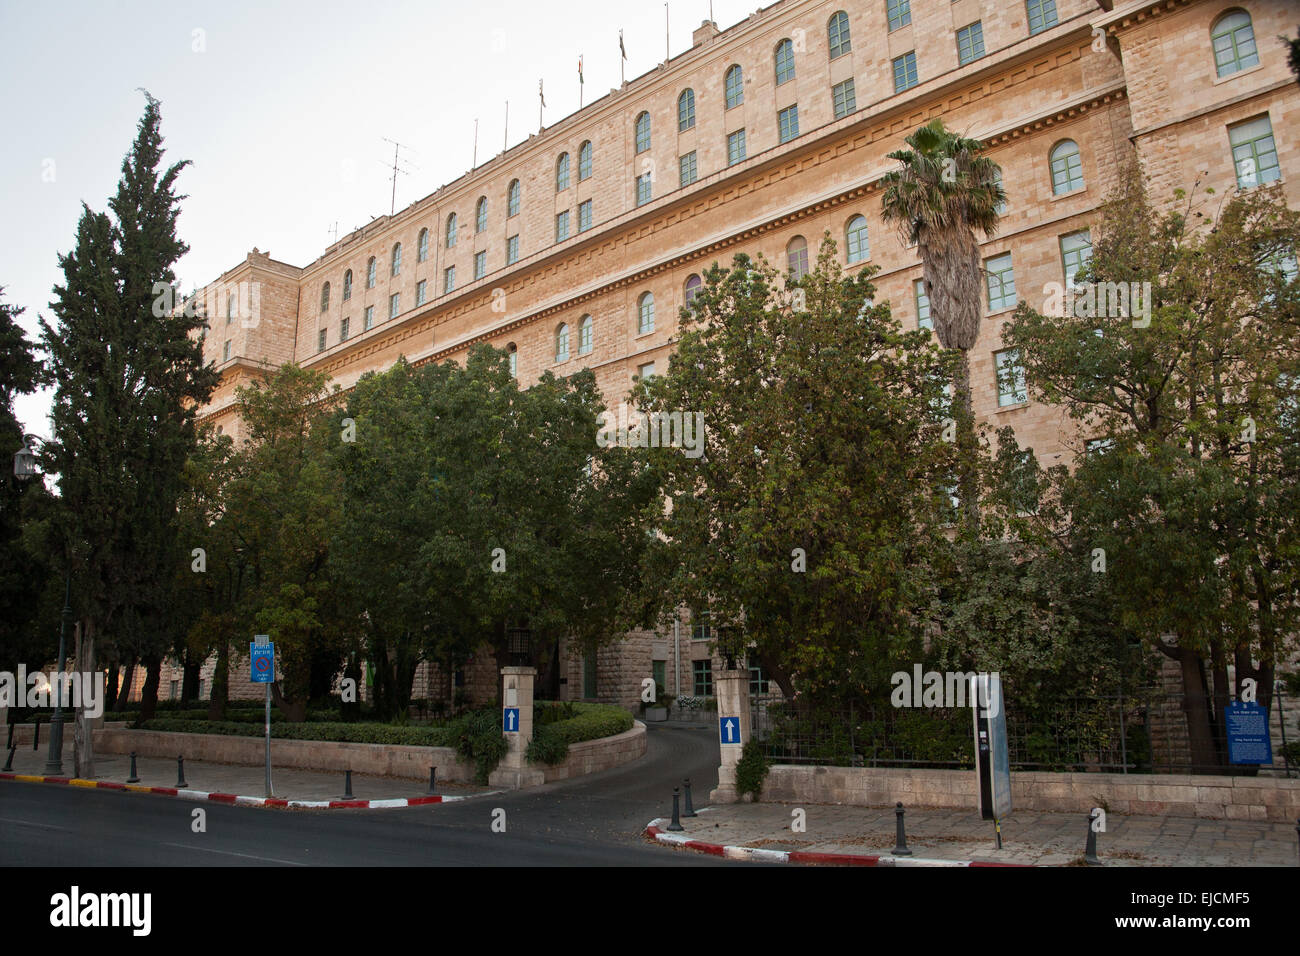 King David Hotel main entrance. The hotel housed the British Mandate Secretariat and army headquarters. On July 22 1946 underground Irgun resistance fighters, planted explosives in the basement, destroying the west wing and killing 92. Jerusalem, Israel. 19-June-2012. Stock Photo